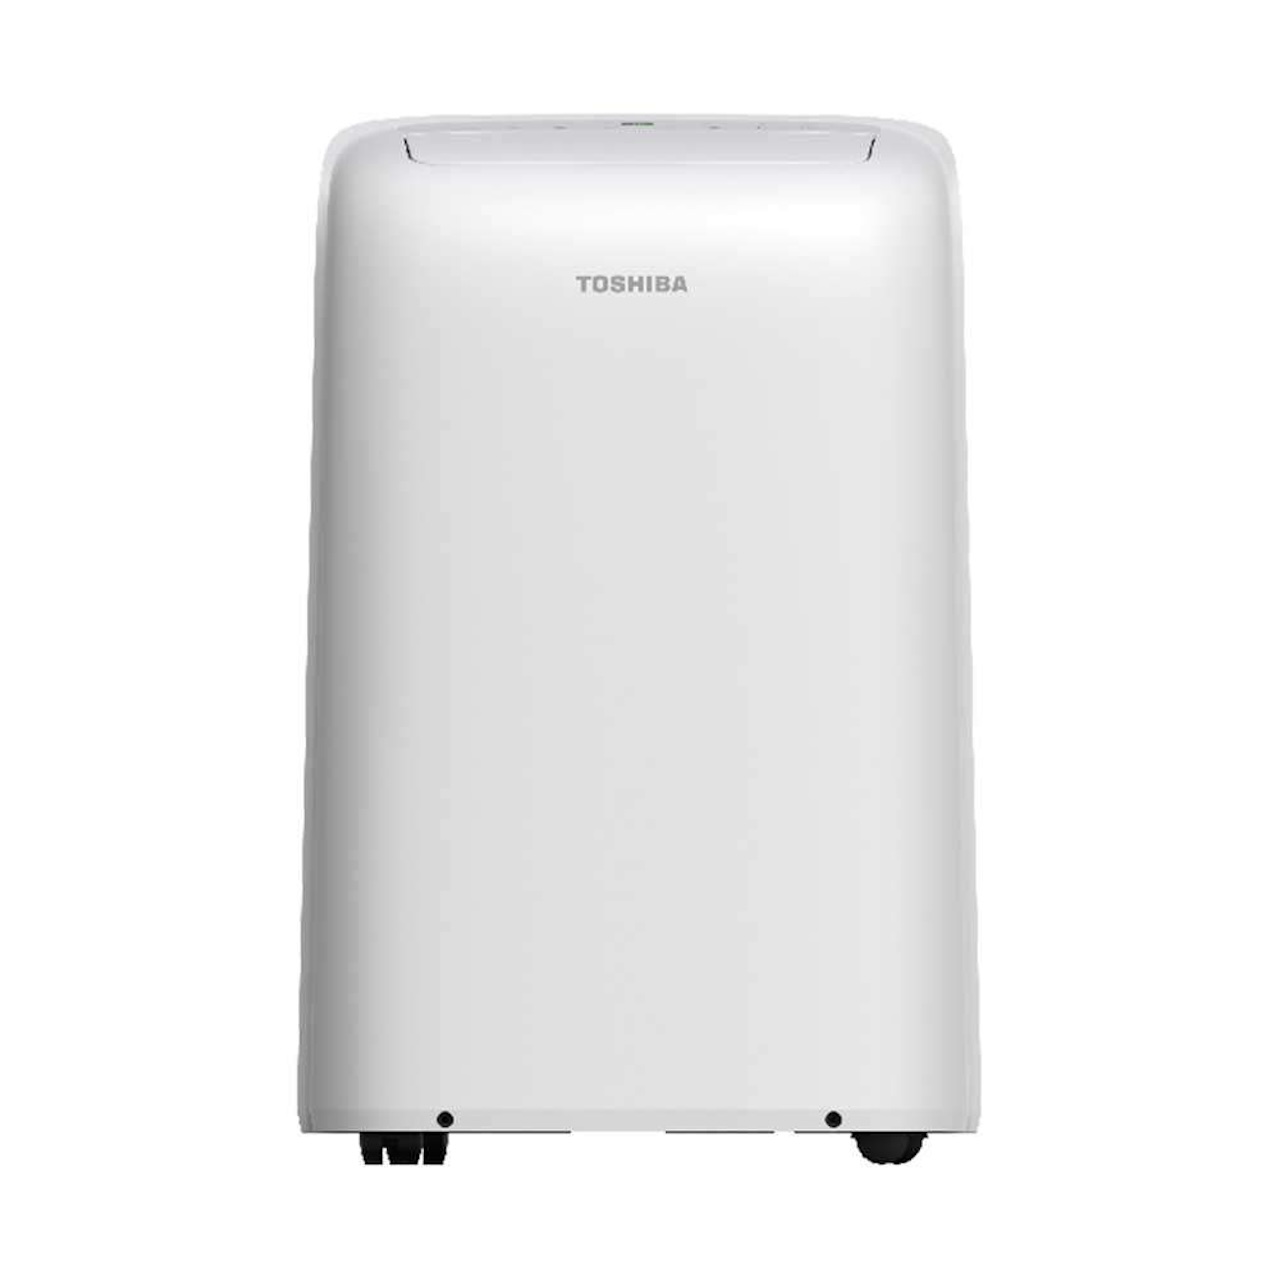 How To Install A Toshiba Portable Air Conditioner